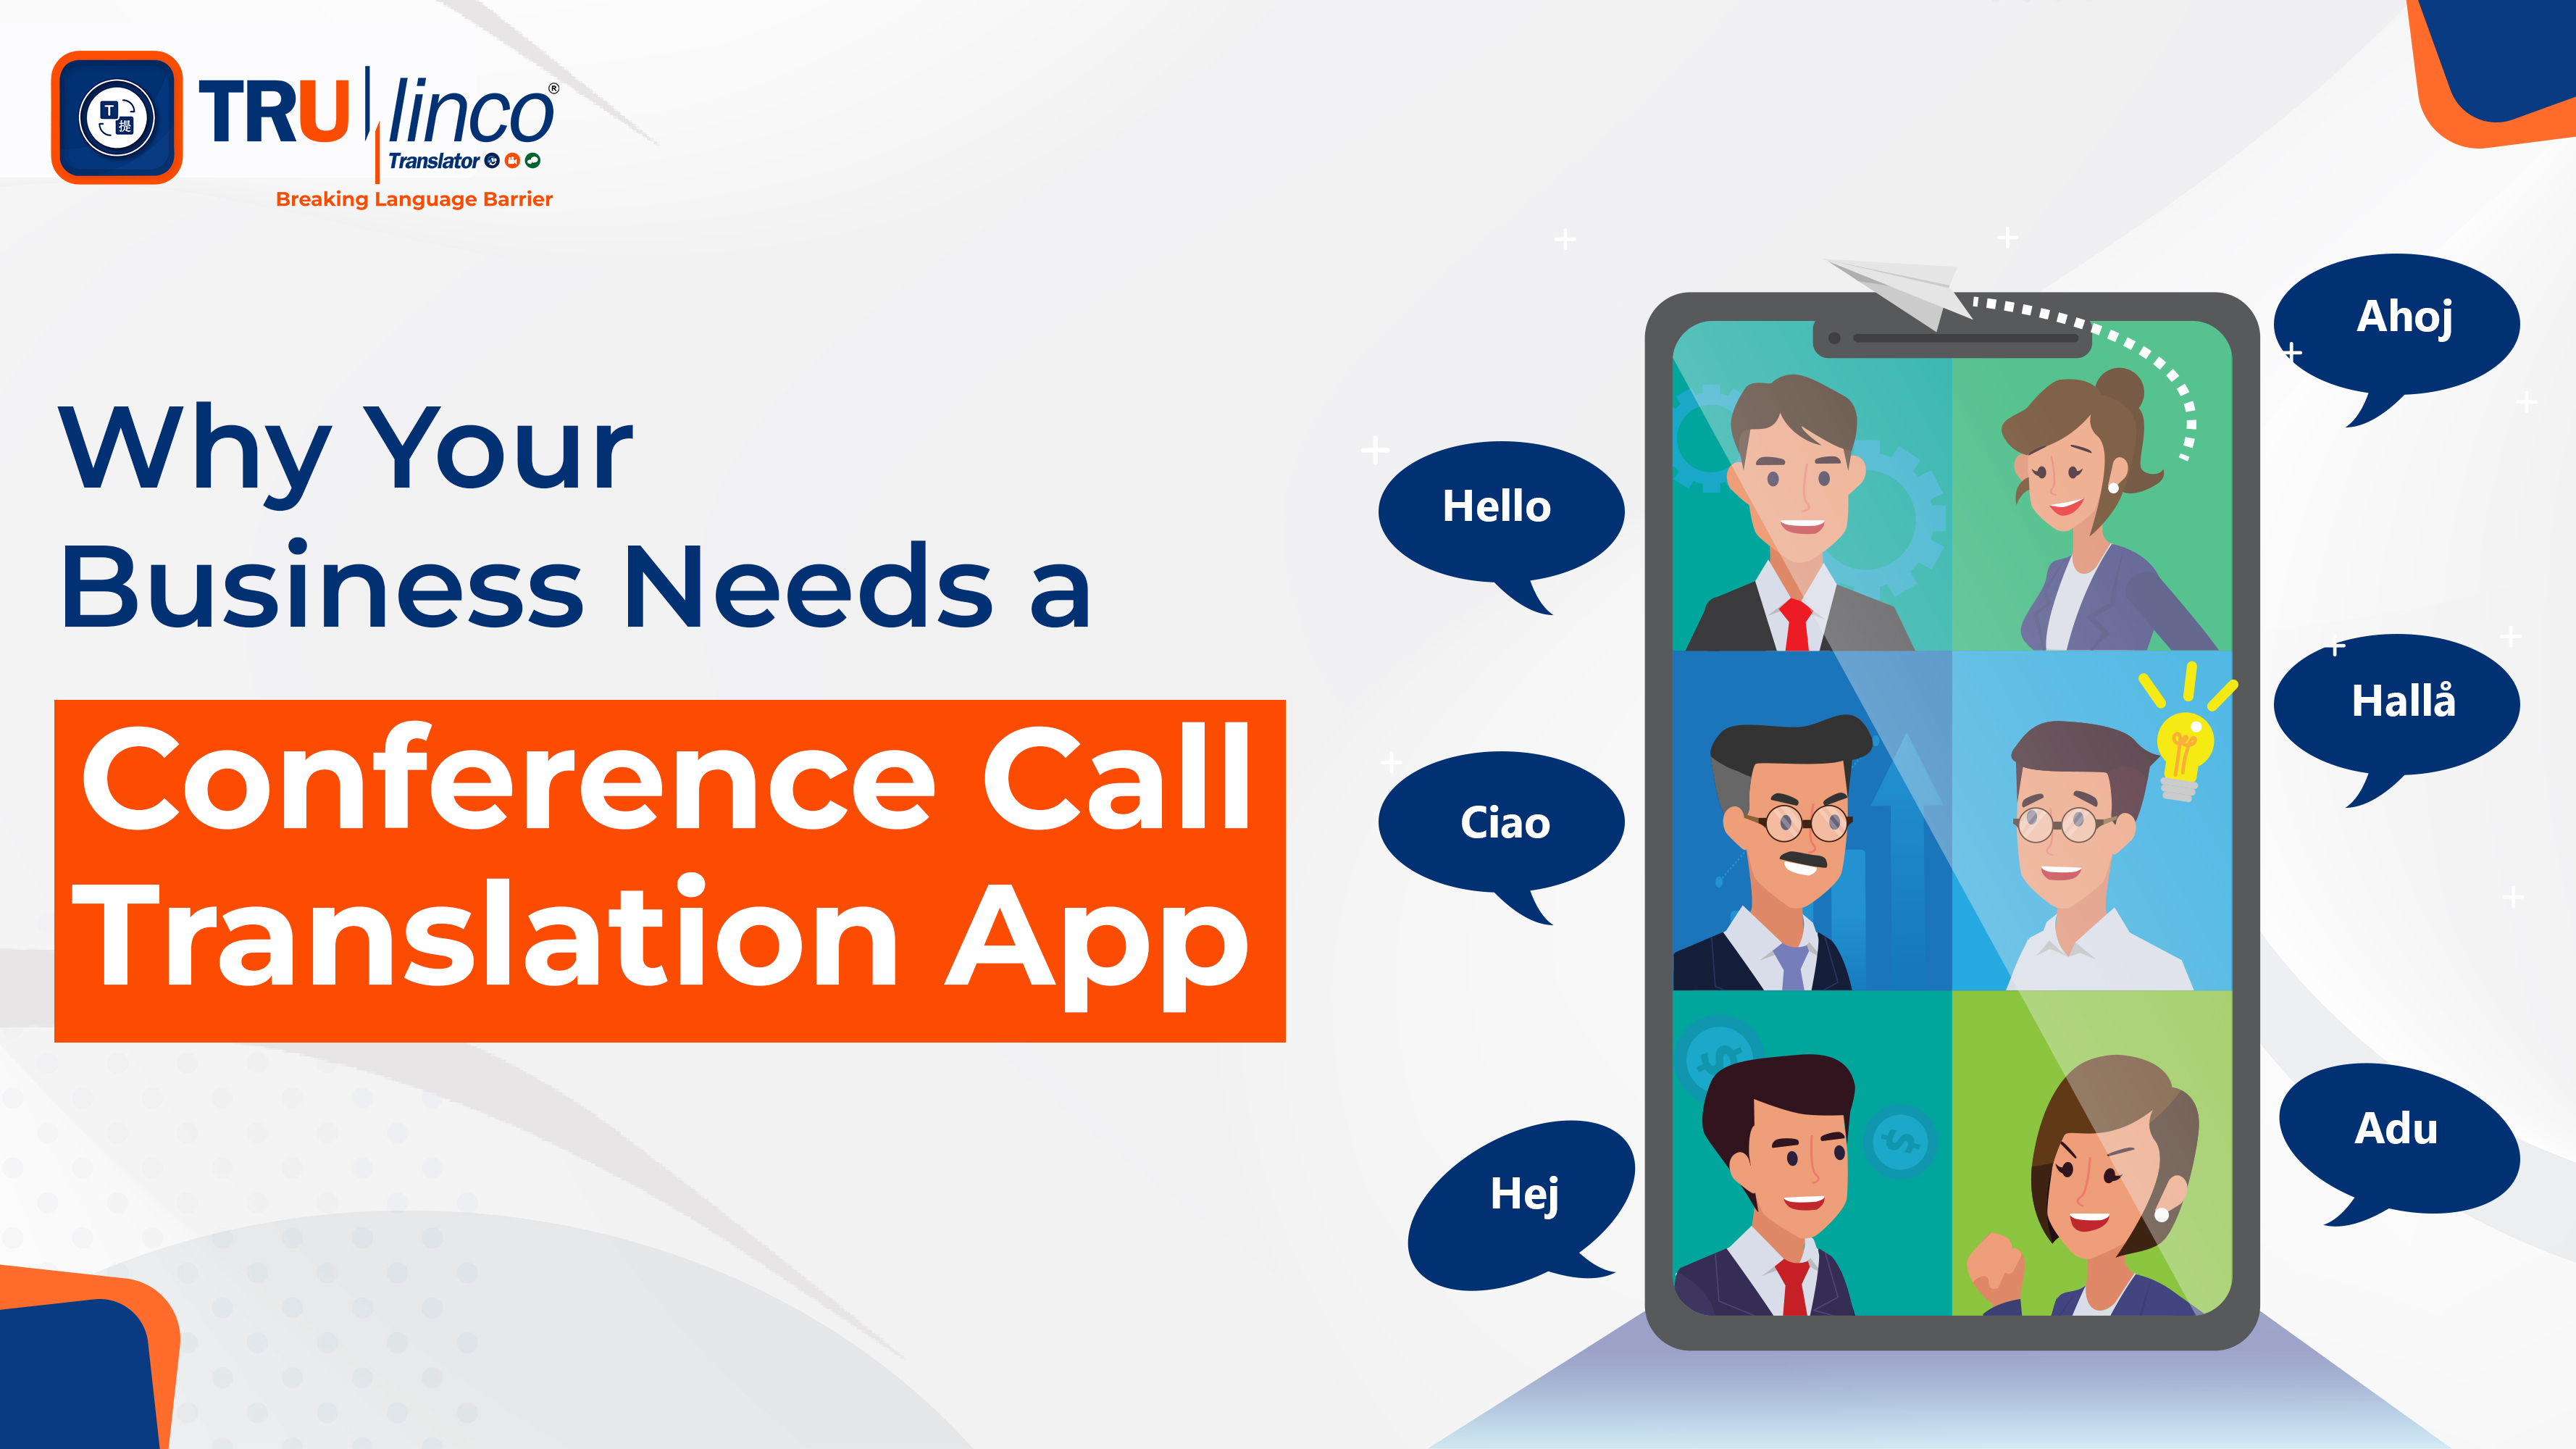 Why Your Business Needs a Conference Call Translation App